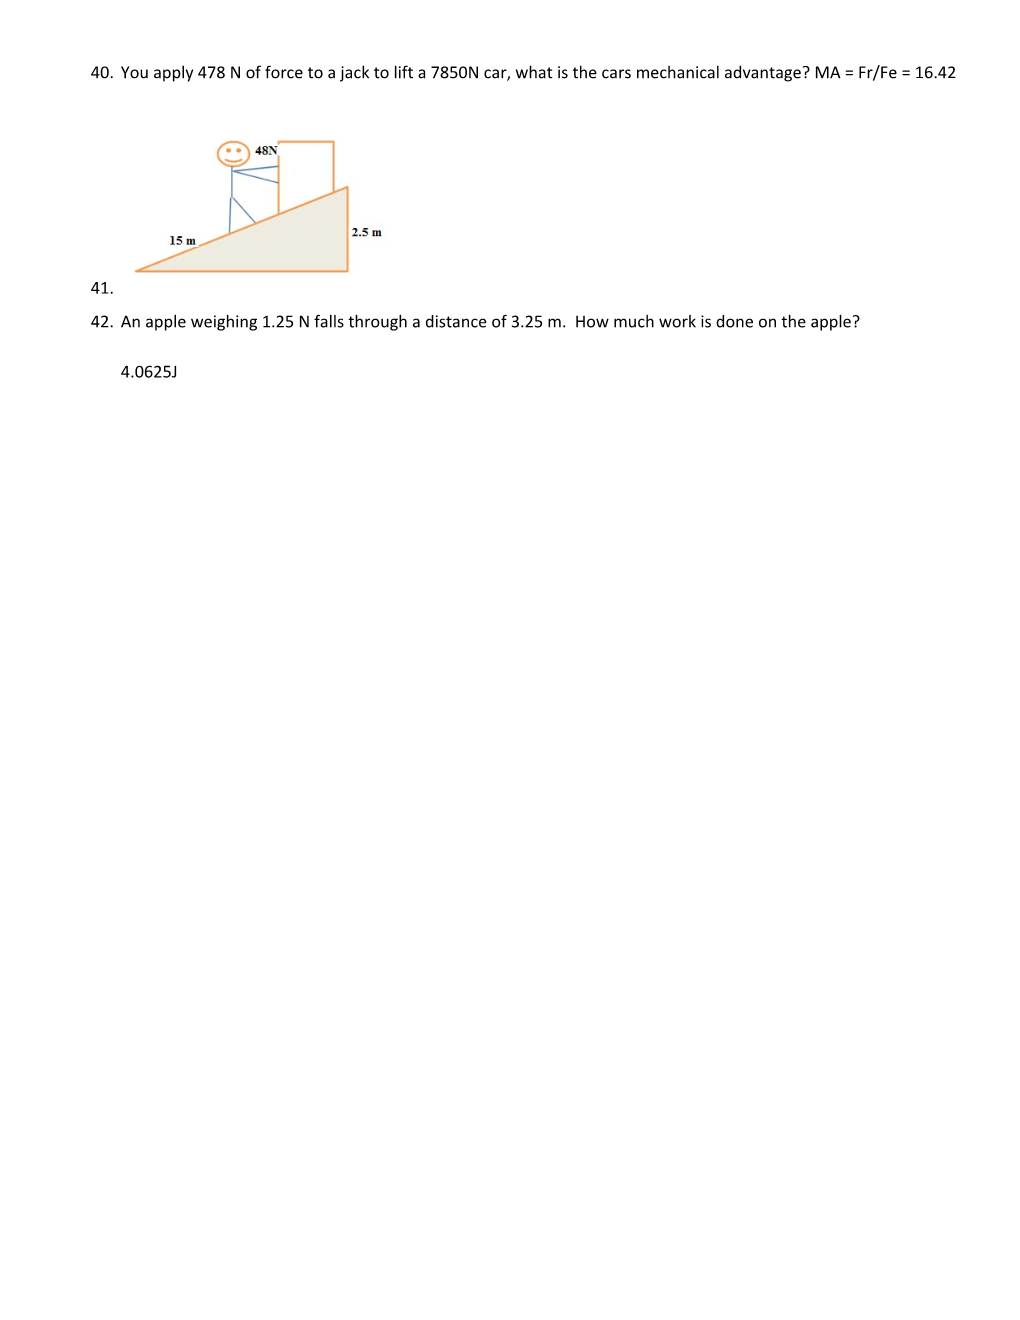 UNIT 3: Chapter 14 Work, Power & Machines Test Review